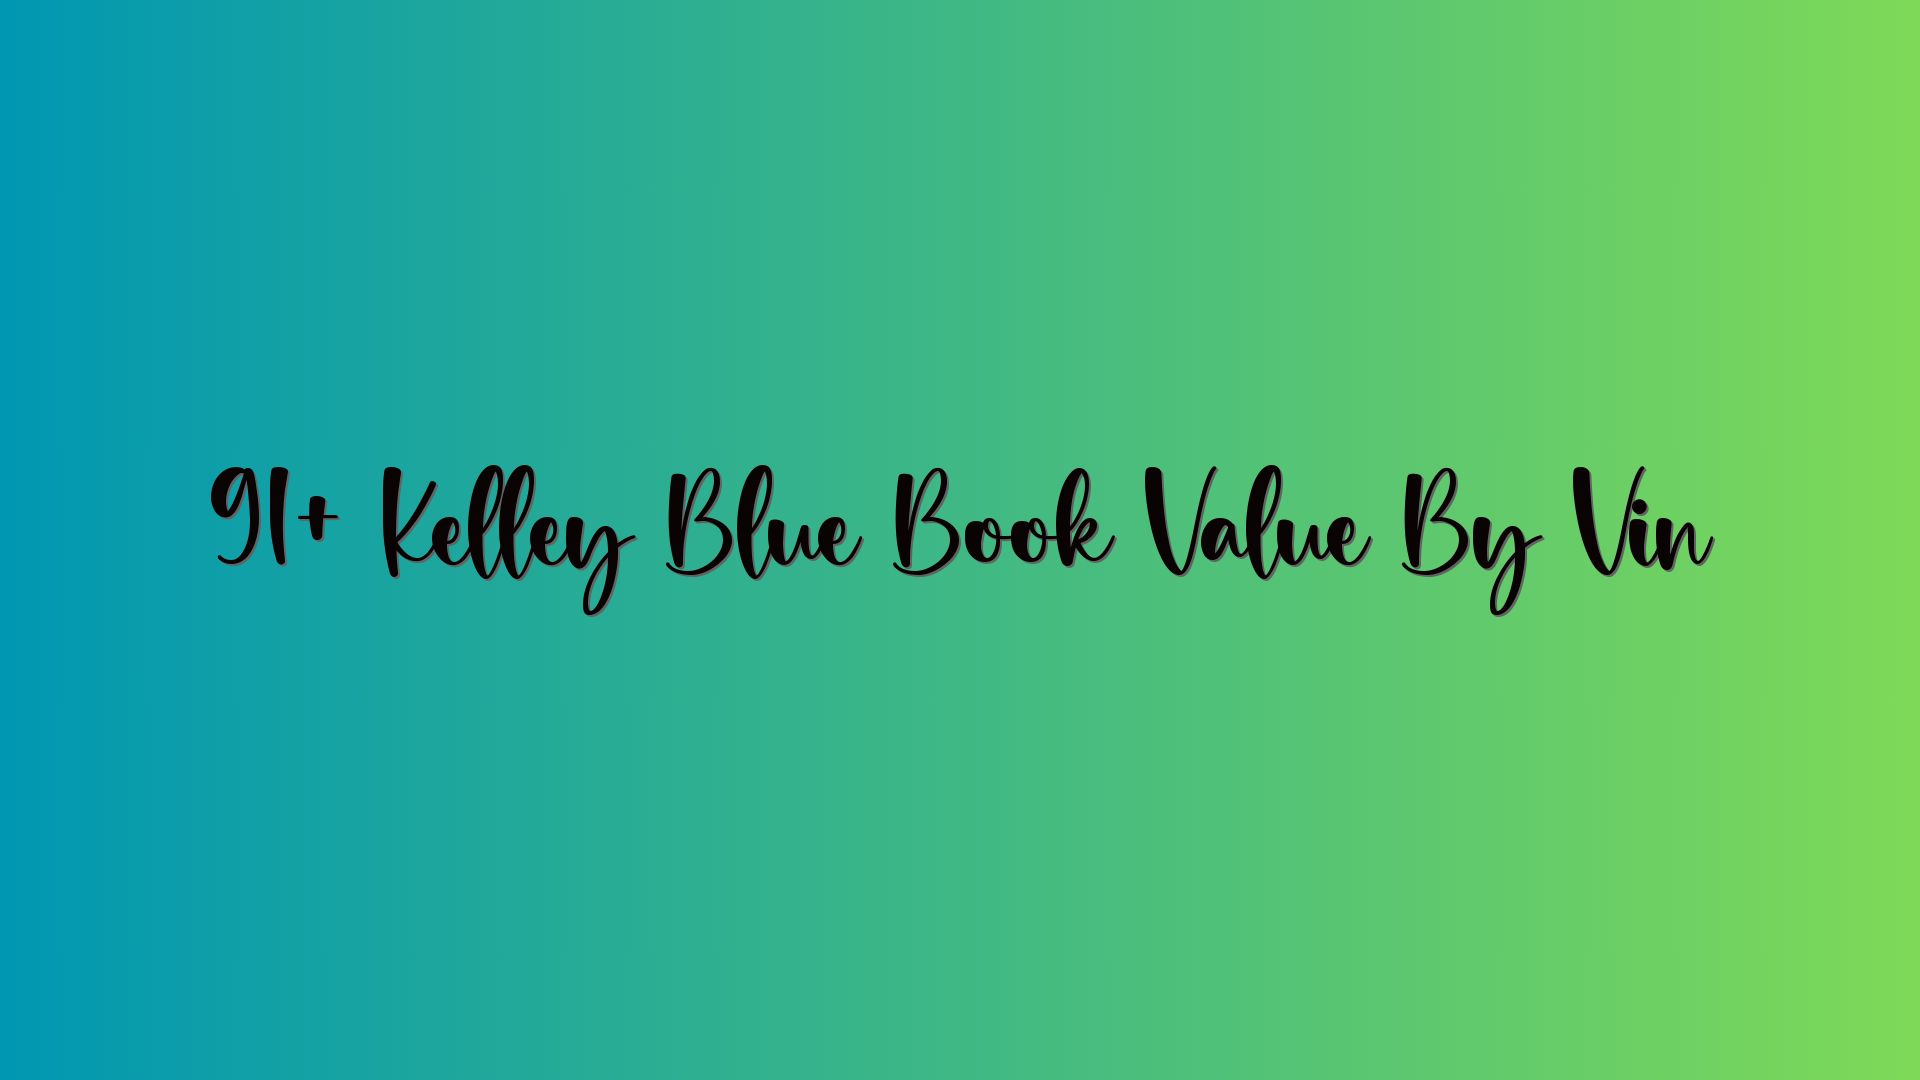 91+ Kelley Blue Book Value By Vin